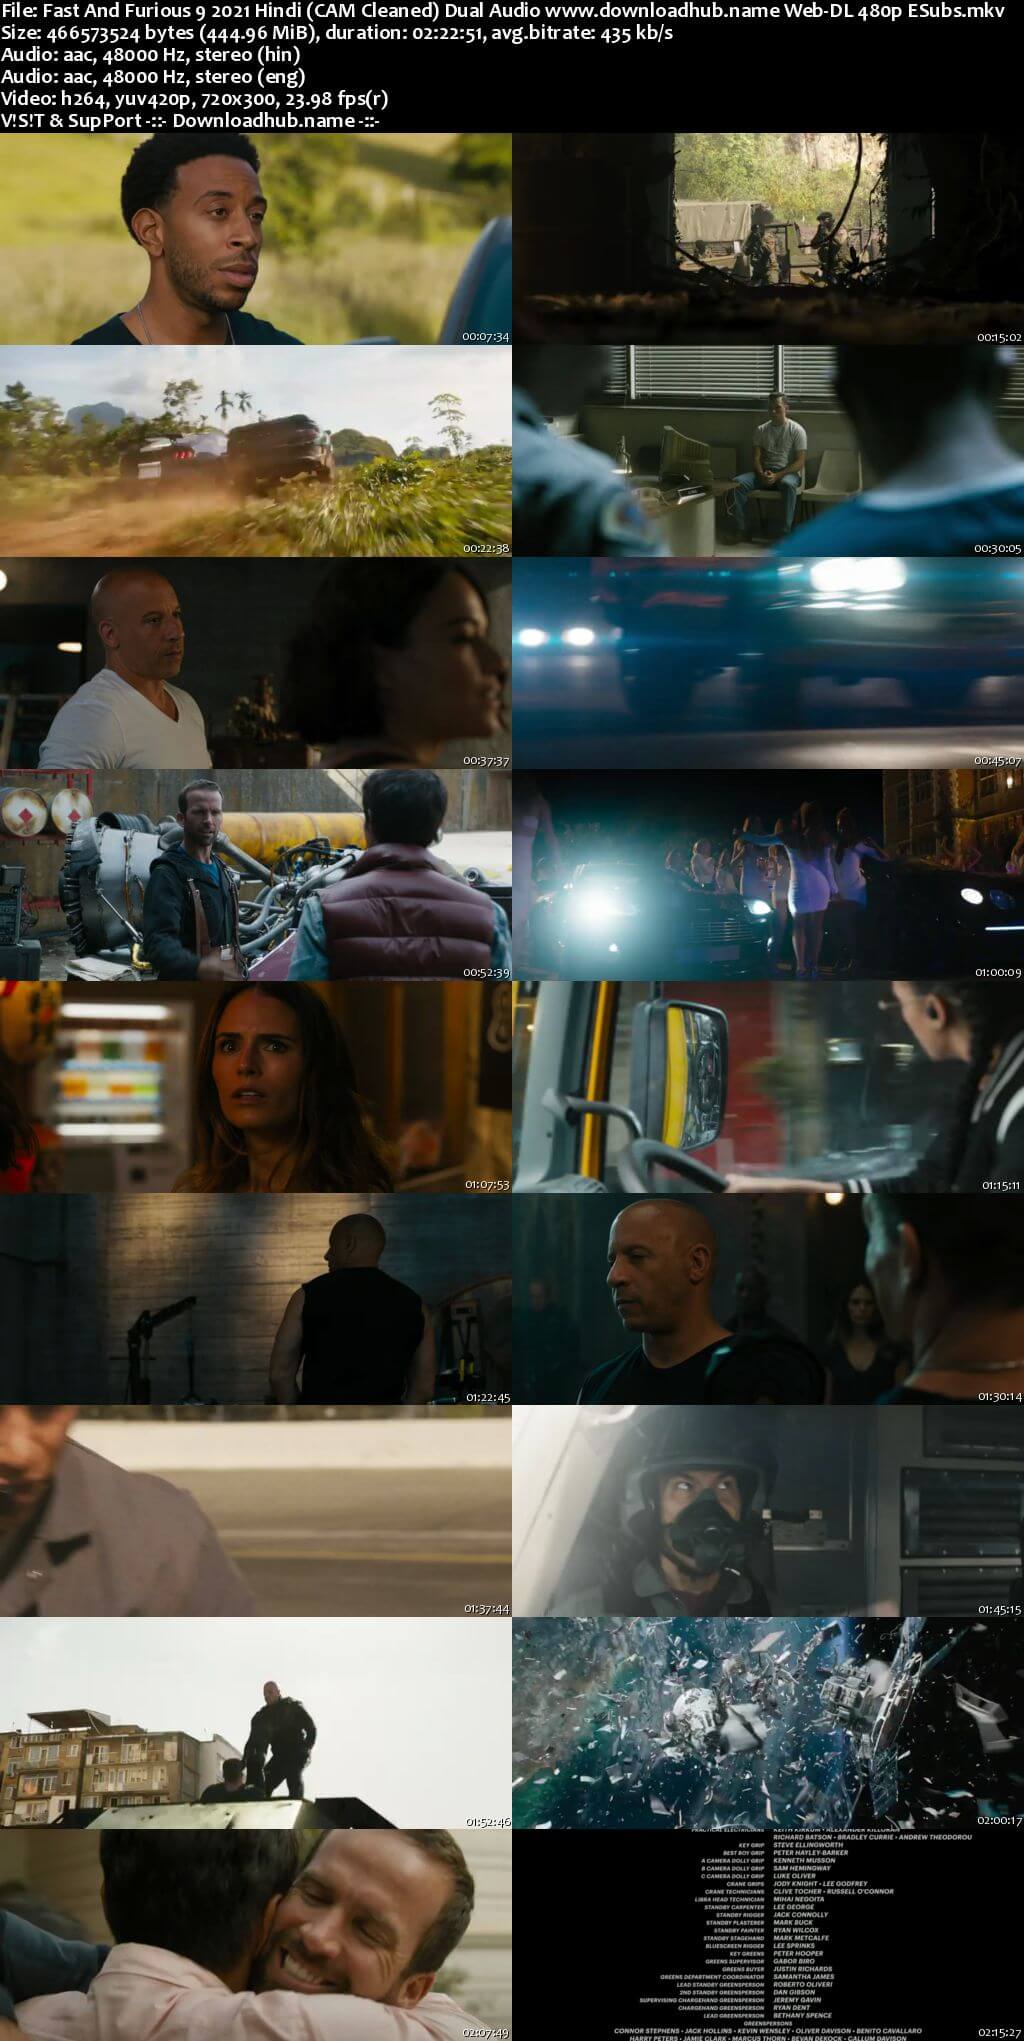 Fast And Furious 9 2021 Hindi (CAM Cleaned) Dual Audio 450MB Web-DL 480p ESubs